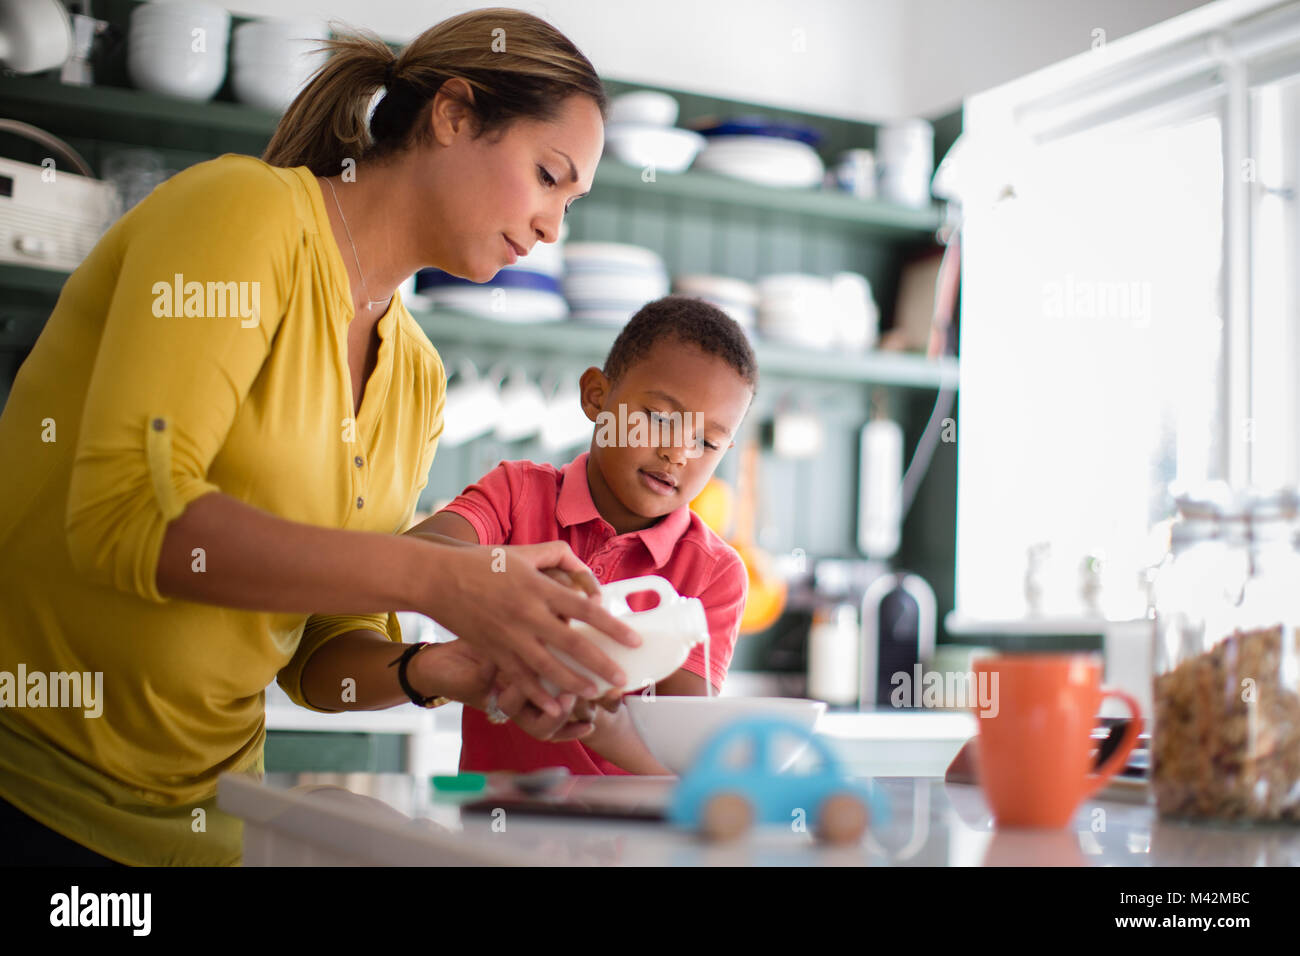 Mum helping son with breakfast Stock Photo